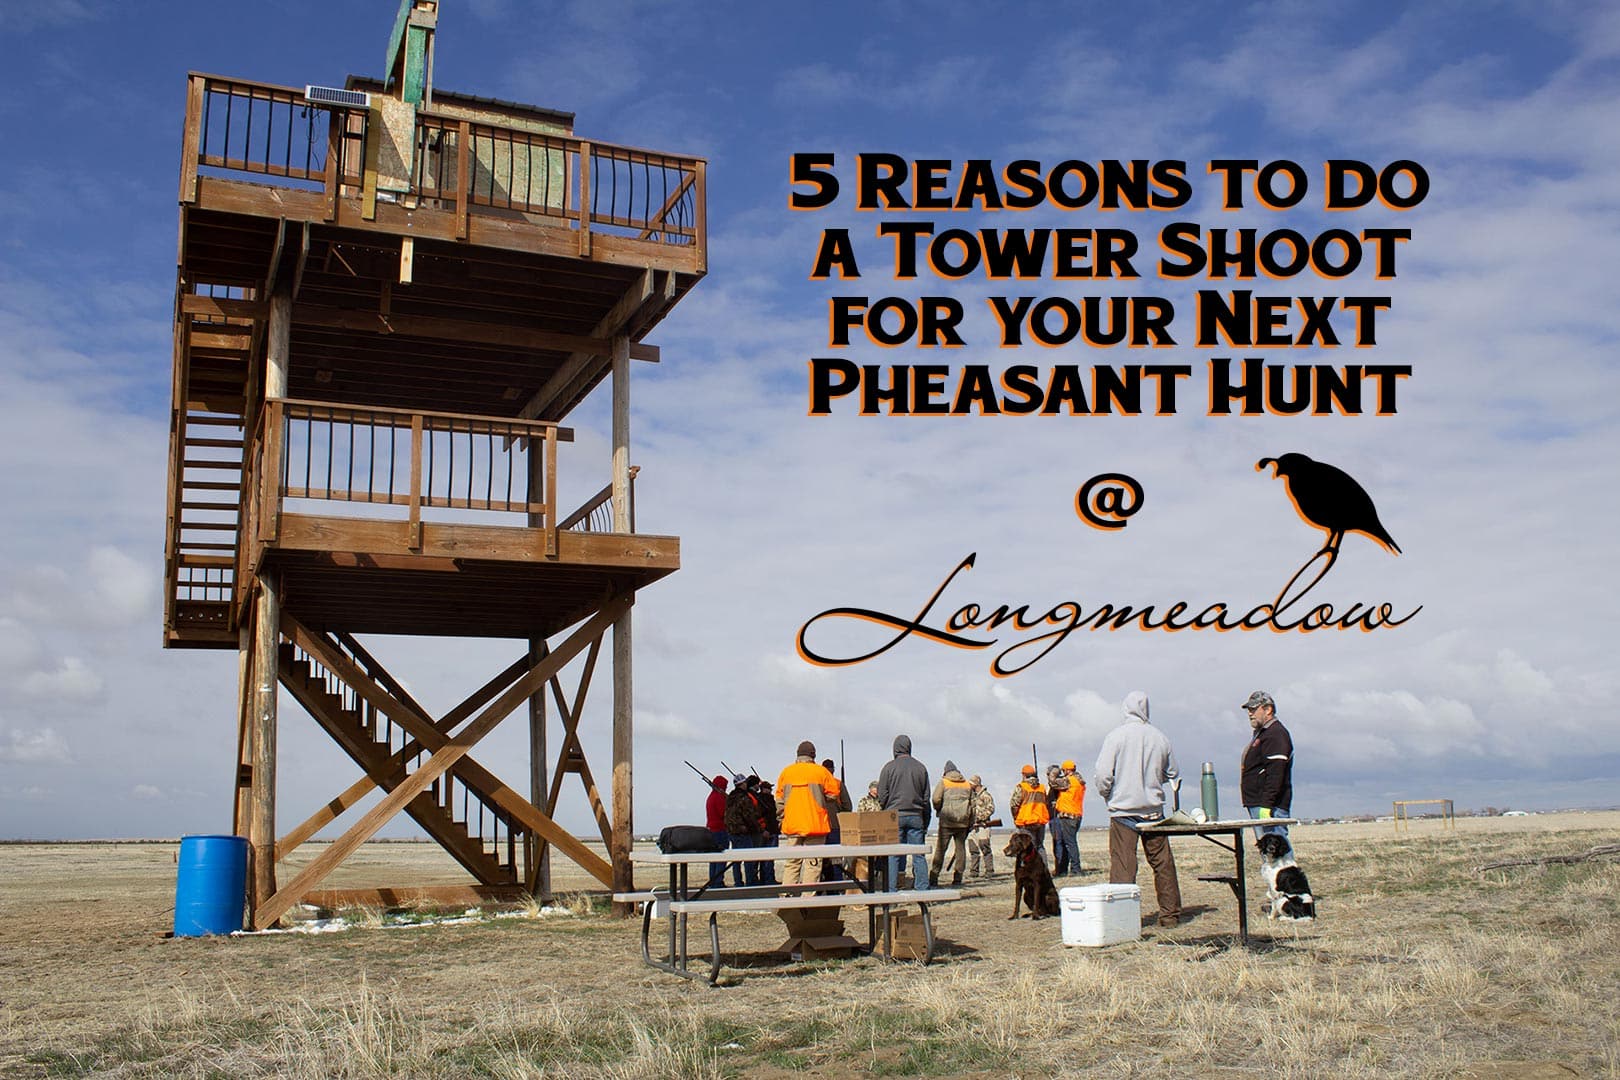 5 Reasons to do a Tower Shoot for Your Next Pheasant Hunt